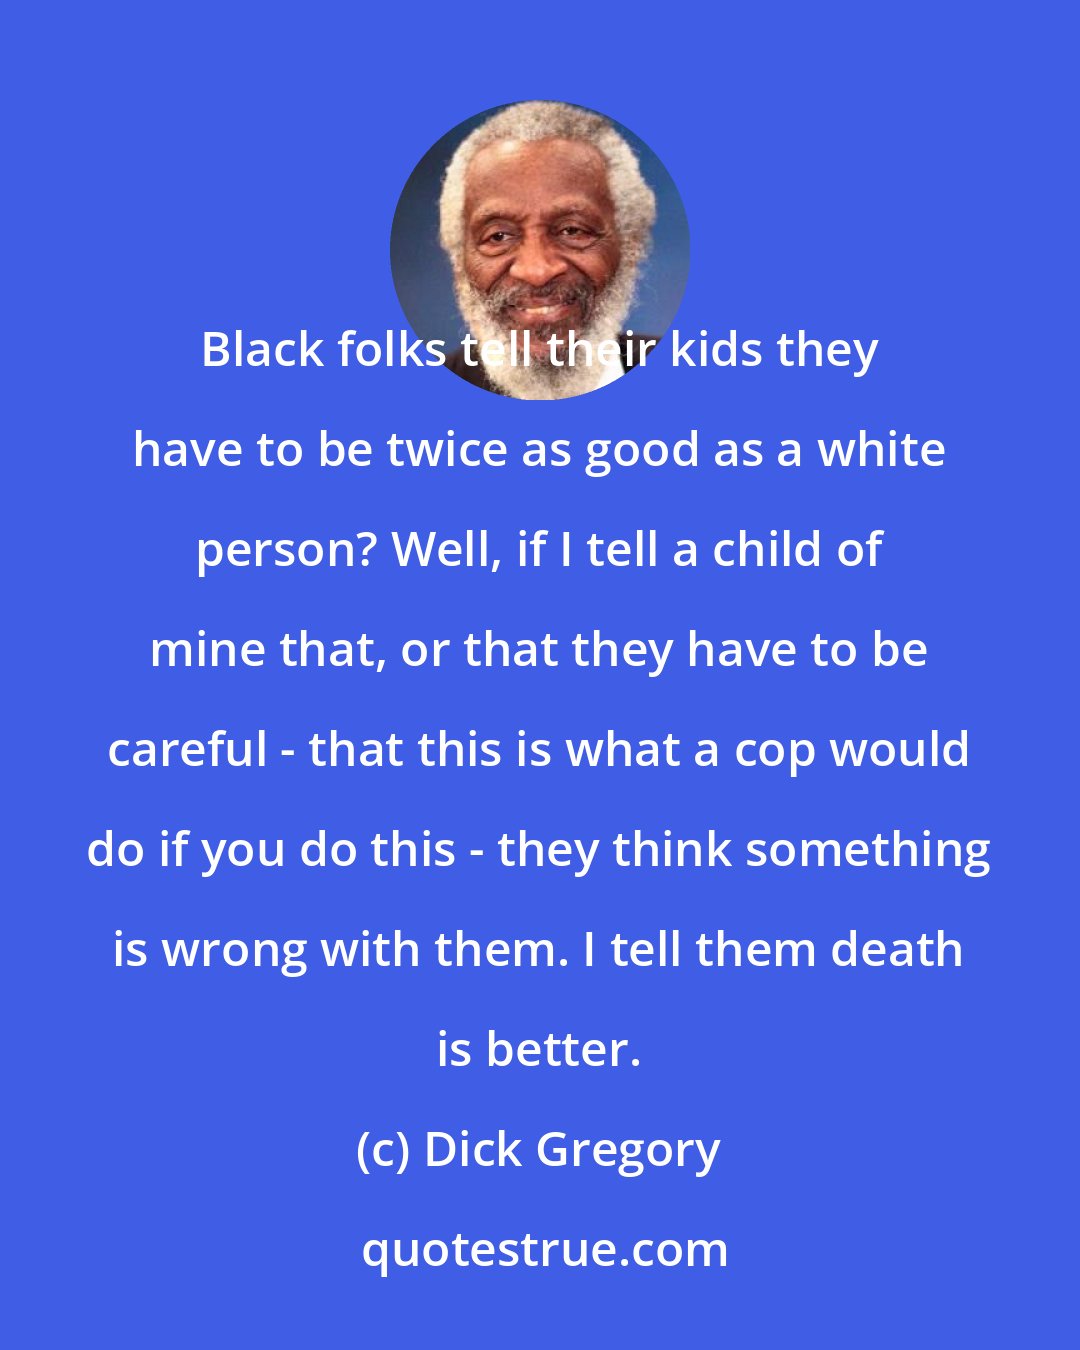 Dick Gregory: Black folks tell their kids they have to be twice as good as a white person? Well, if I tell a child of mine that, or that they have to be careful - that this is what a cop would do if you do this - they think something is wrong with them. I tell them death is better.